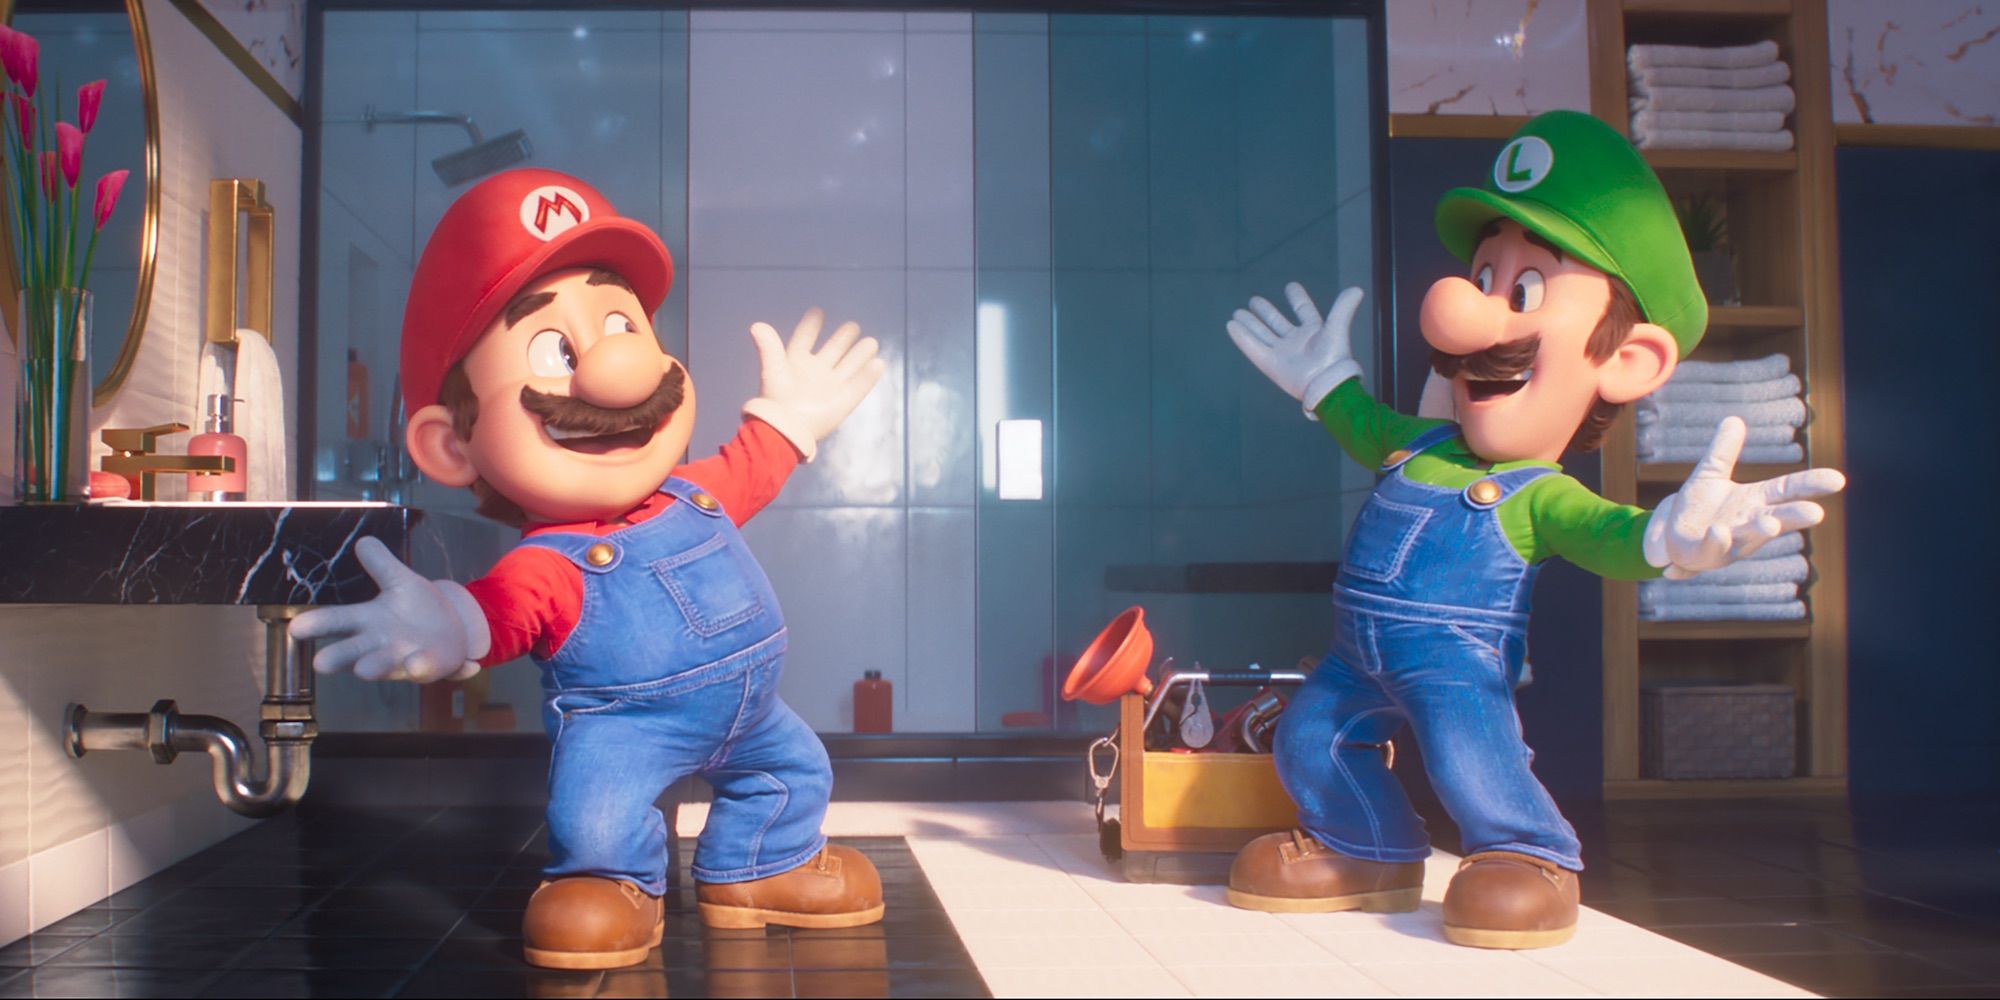 Mario and Luigi looking excited, raising their hands